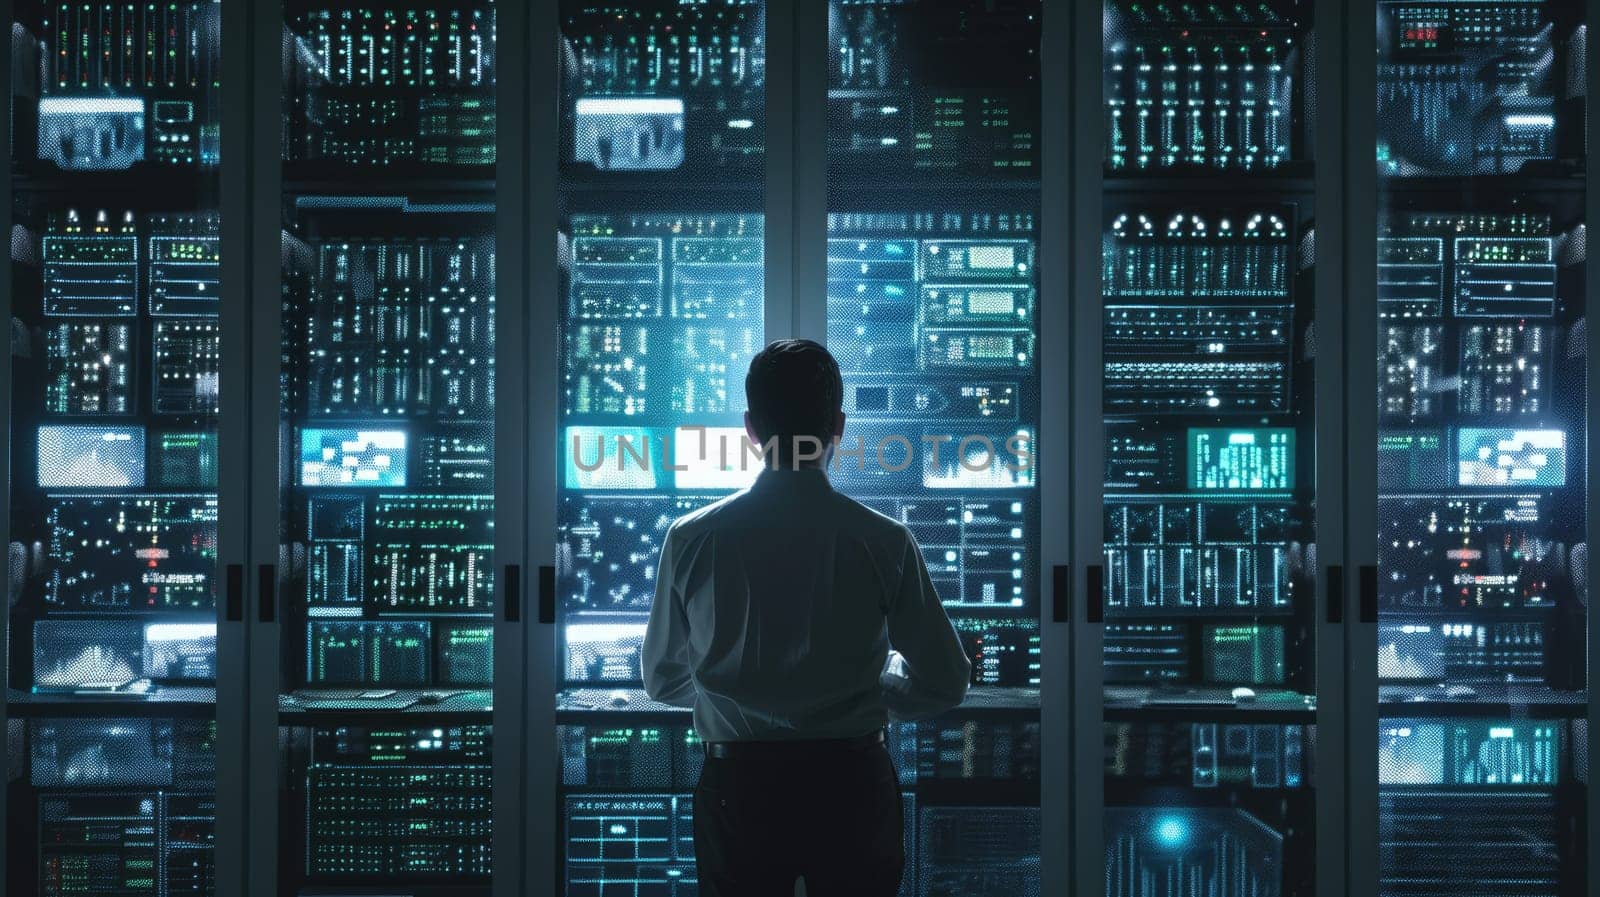 A guy stands before a wall of computer monitors displaying water-like electronic devices in electric blue font, bringing entertainment to the city amidst the darkness. AIG41